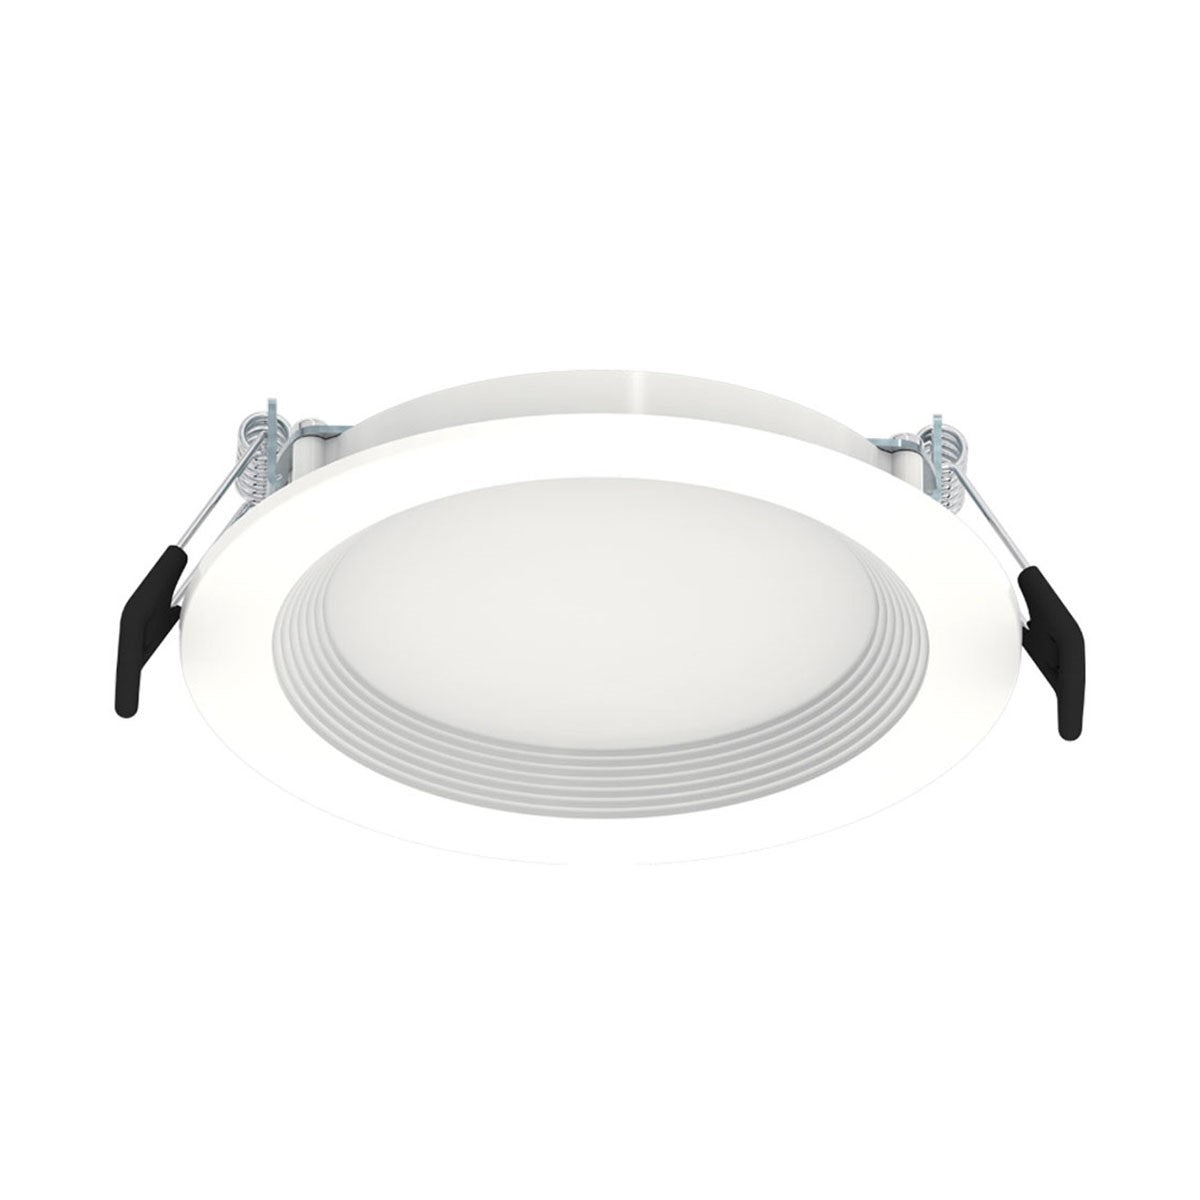 6 In. Wafer Canless LED Recessed Light, 13 Watt, 1100 Lumens, Selectable CCT, 2700K to 5000K, Baffle Trim